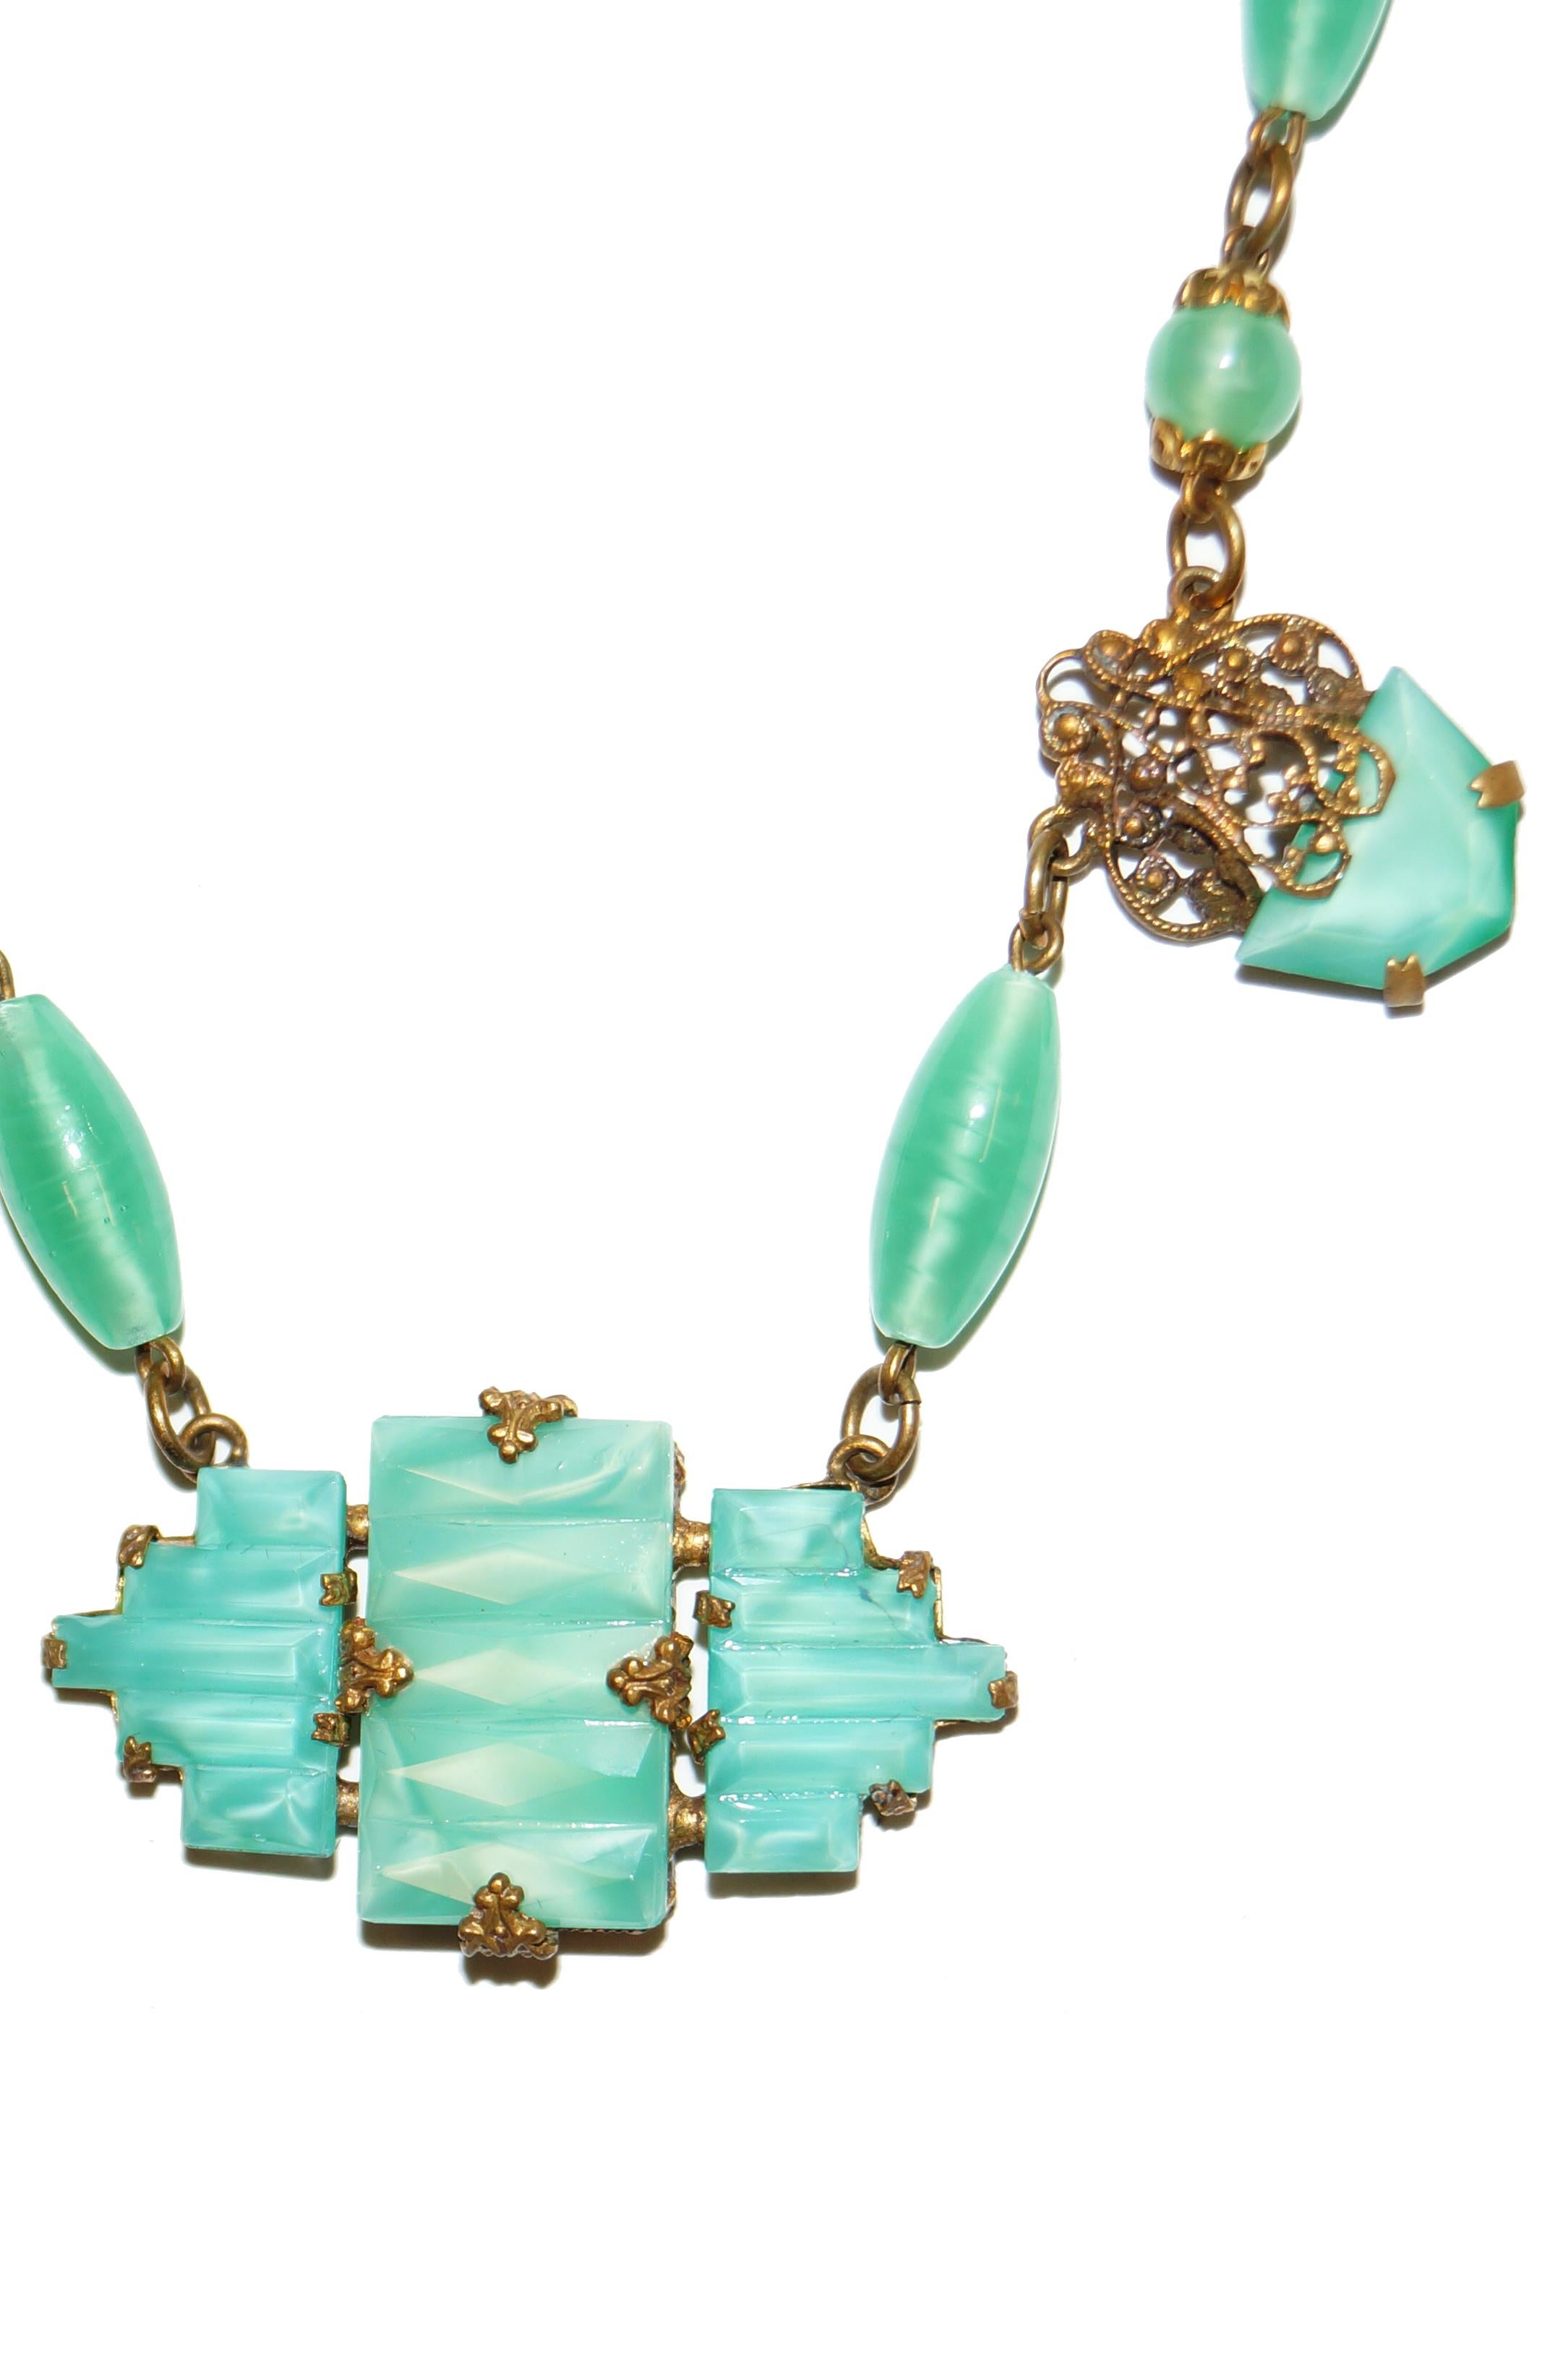 Gorgeous bold green choker necklace and earrings set made of famous bohemian glass! The dangling earrings are composed of a bold rectangular glass beads anchored by baroque swirls beset with milgrain details. The necklace has a center focus of three